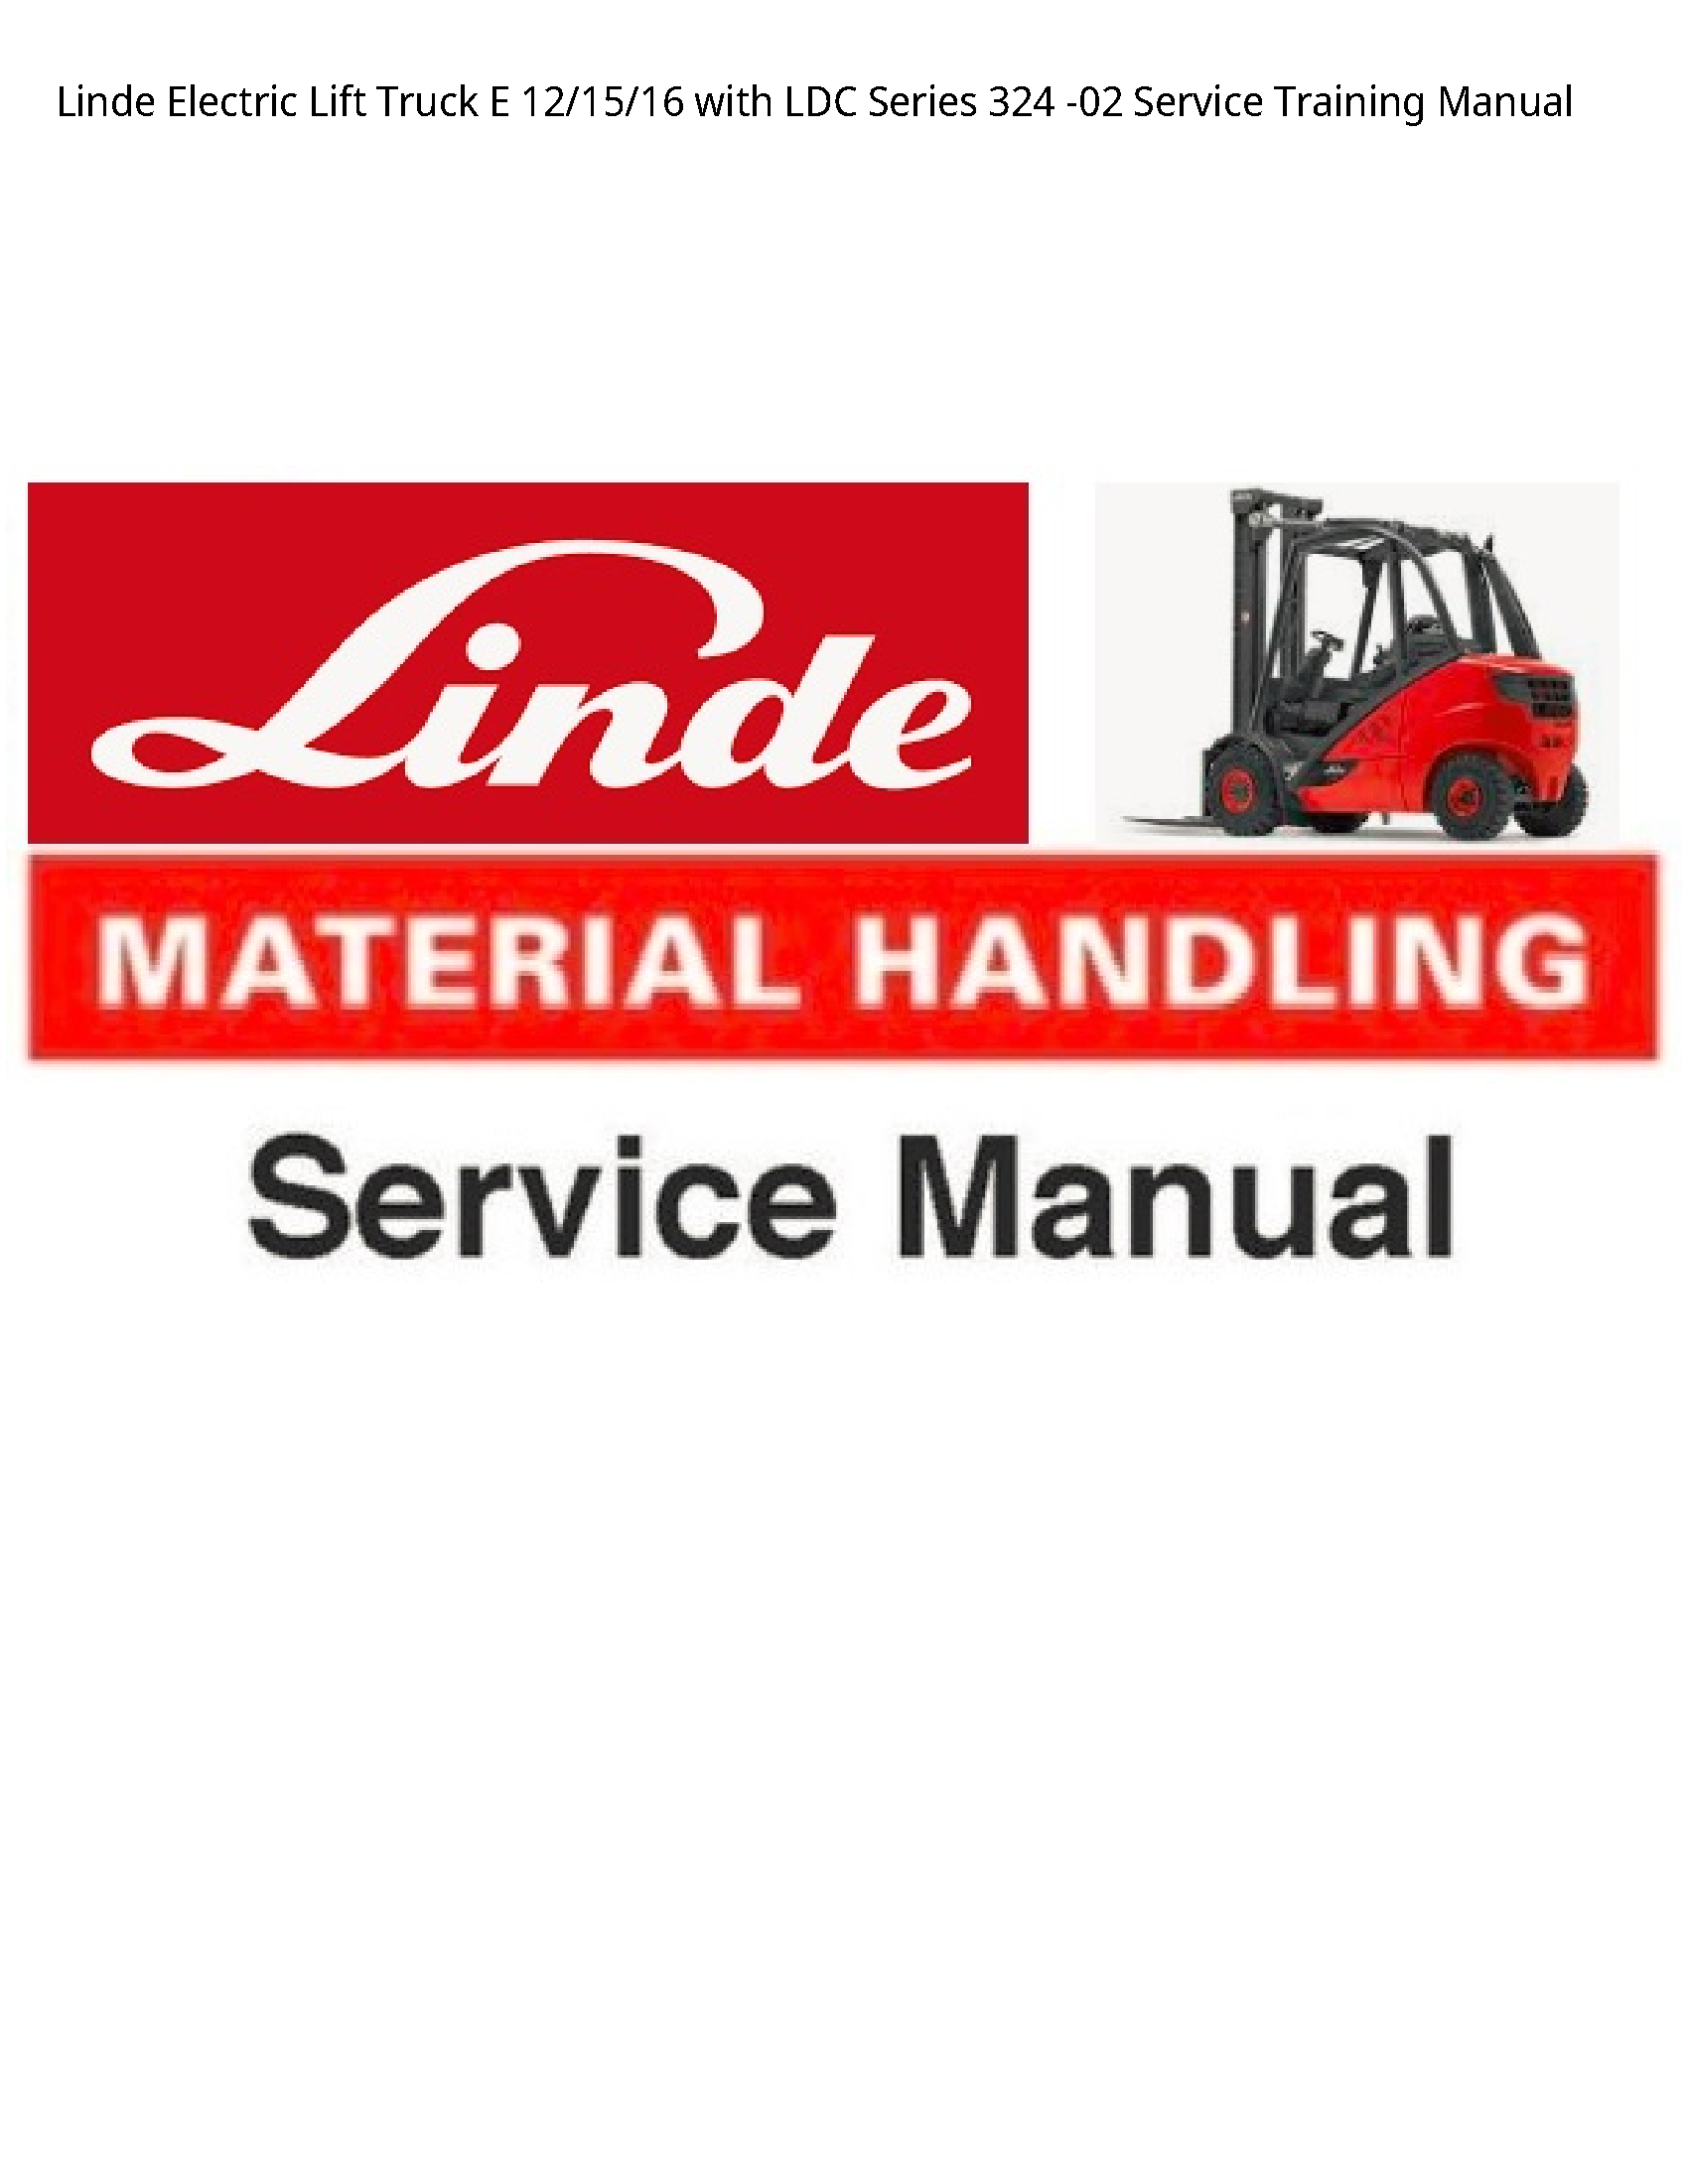 Linde 12 Electric Lift Truck with LDC Series Service Training manual